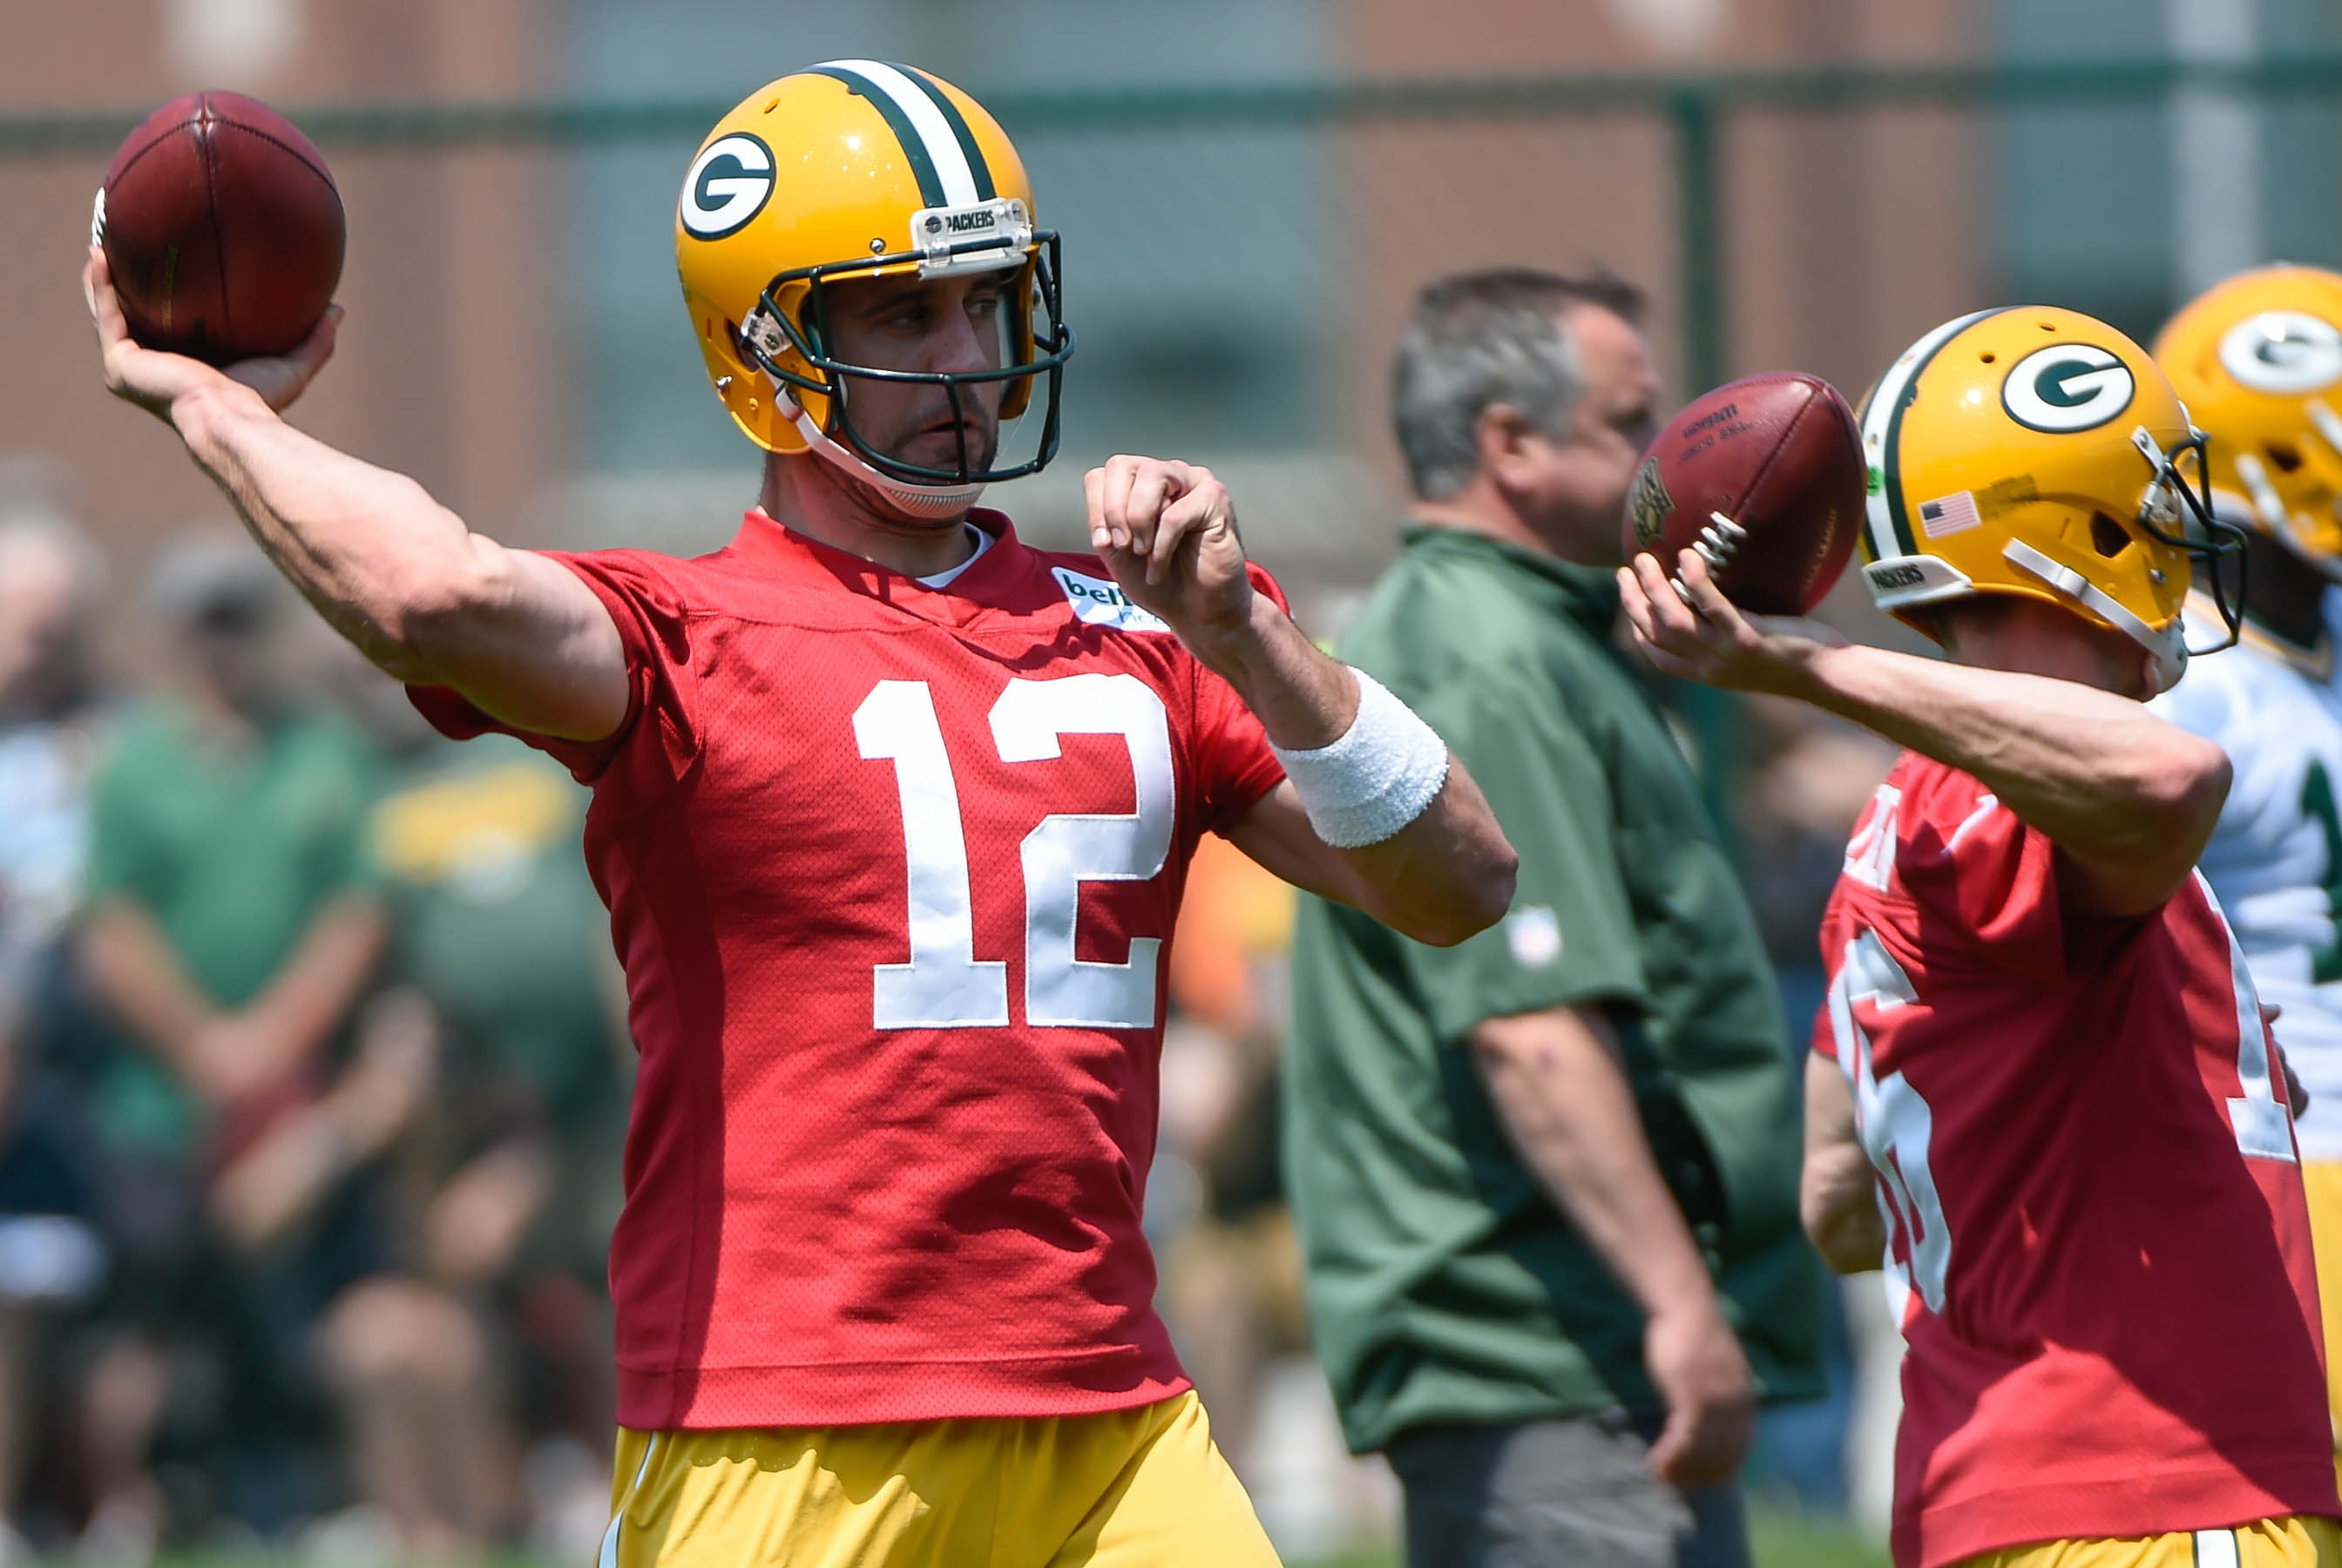 The Packers' gunslinger was using a different kind of firearm today.